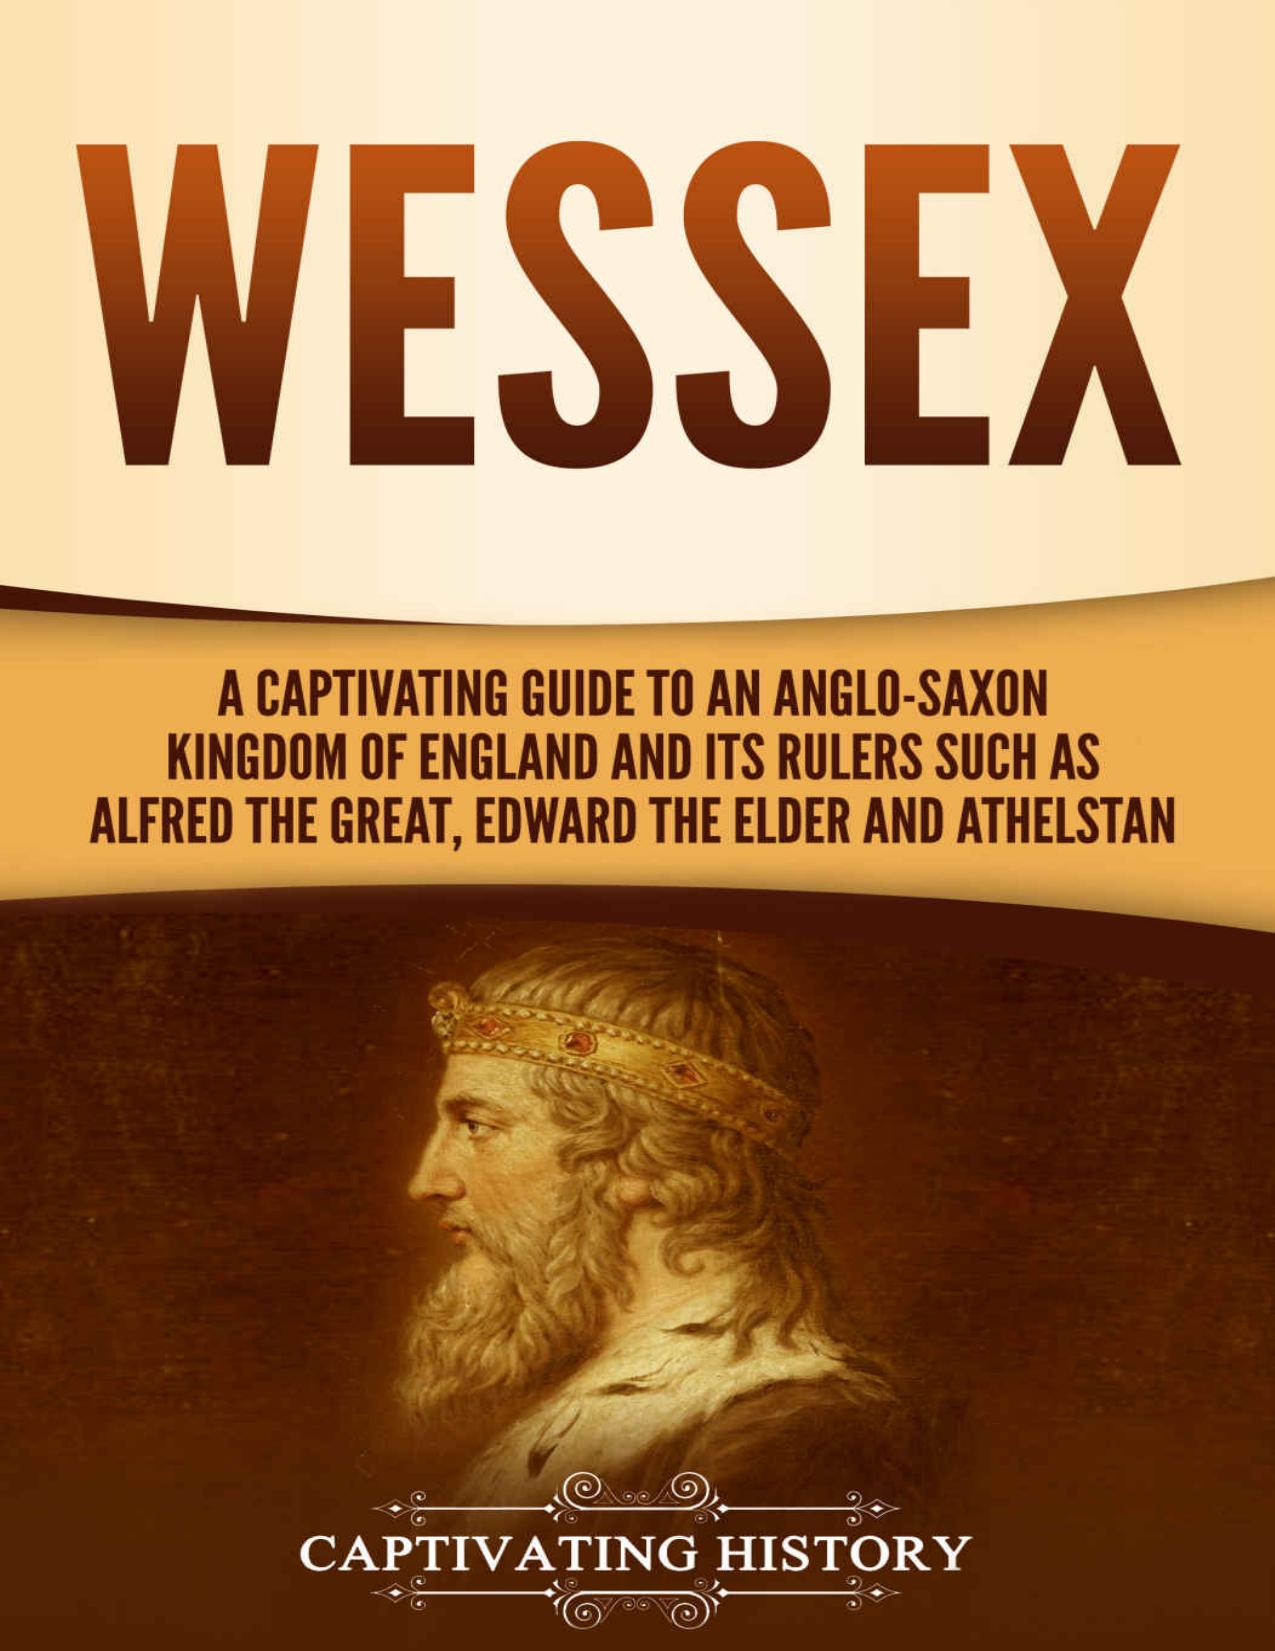 Wessex: A Captivating Guide to an Anglo-Saxon Kingdom of England and Its Rulers Such as Alfred the Great, Edward the Elder, and Athelstan by Captivating History